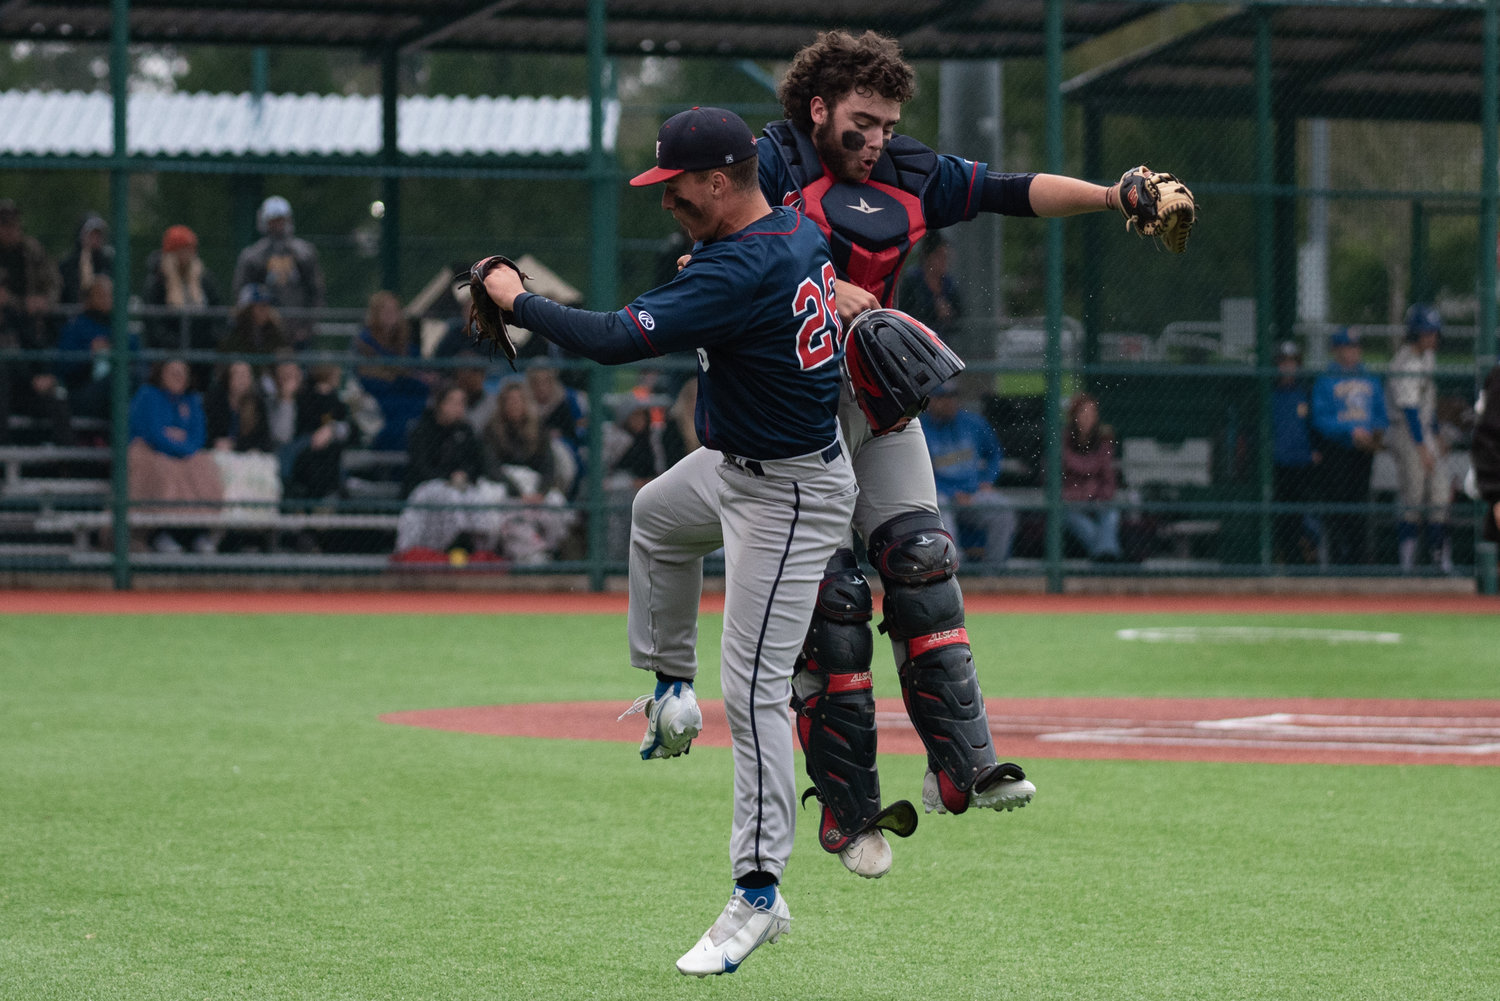 Black Hills catcher Parker Termini and pitcher Brayden Golder celebrate a double play against Rochester in a play-in game at the Regional Athletic Complex in Lacey May 6.